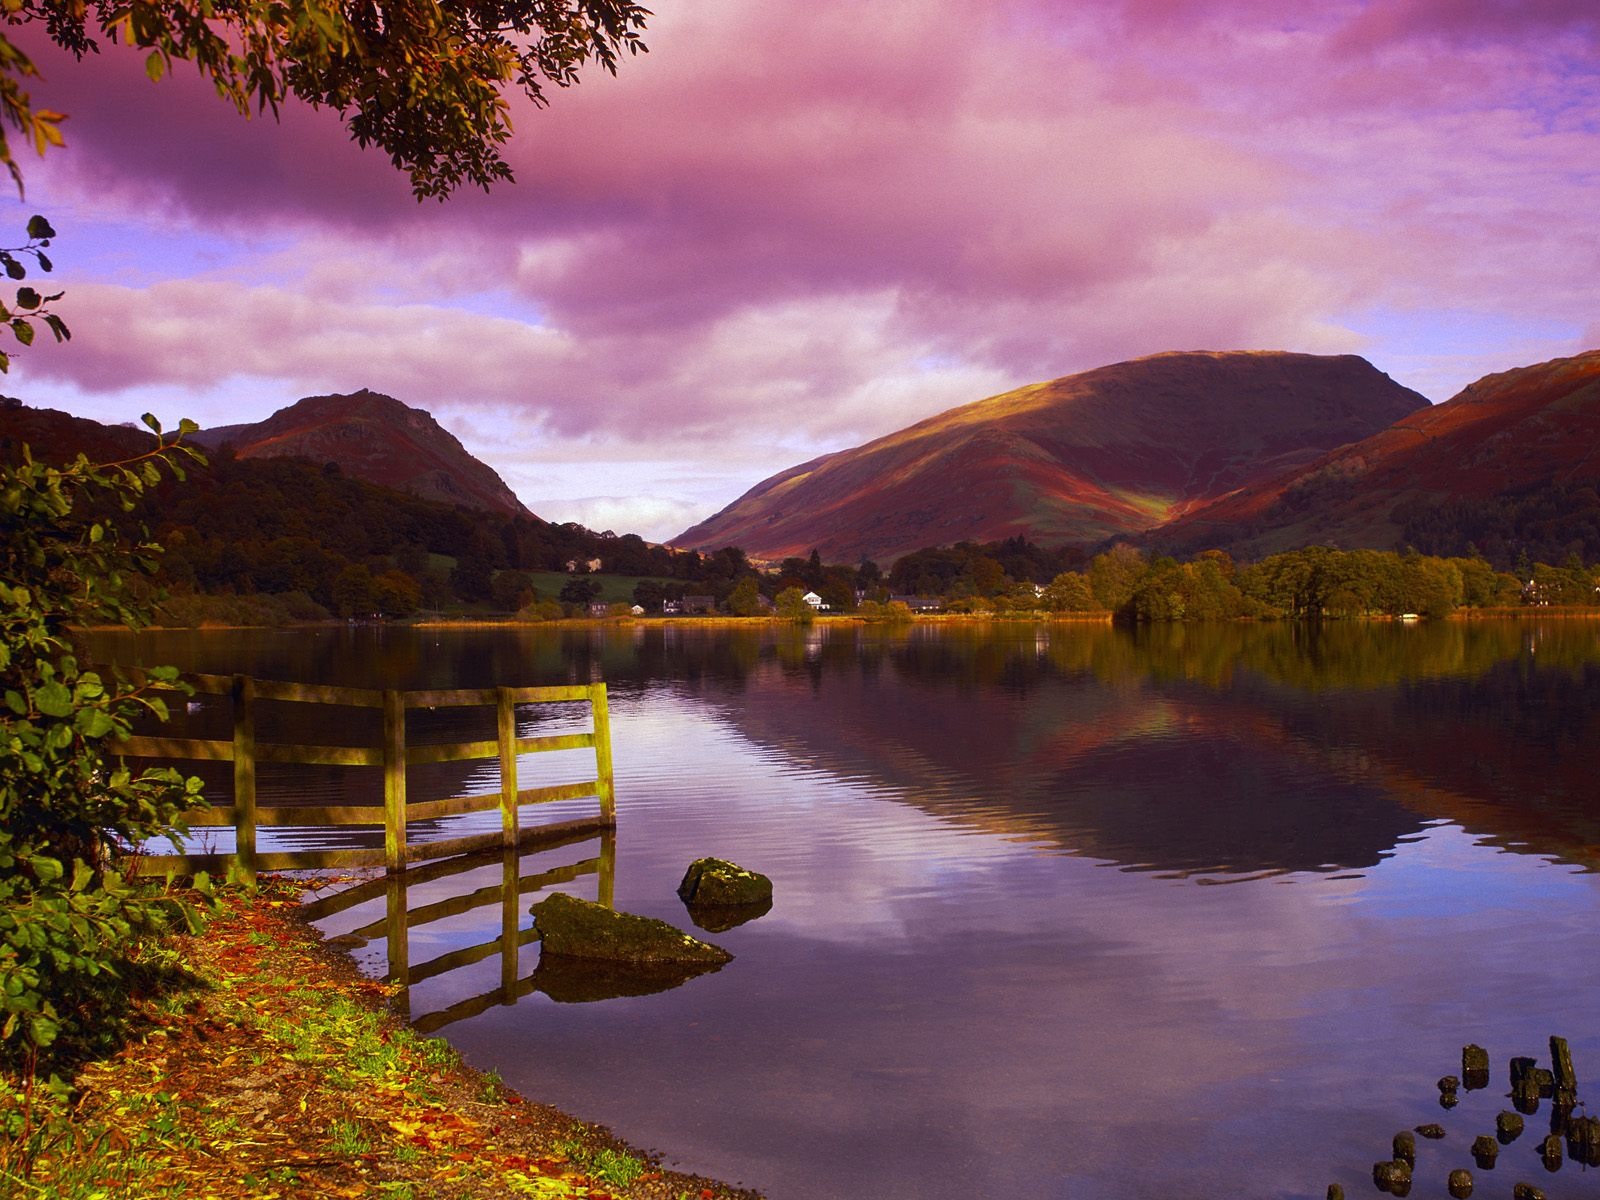 World scenery of England Wallpapers #19 - 1600x1200